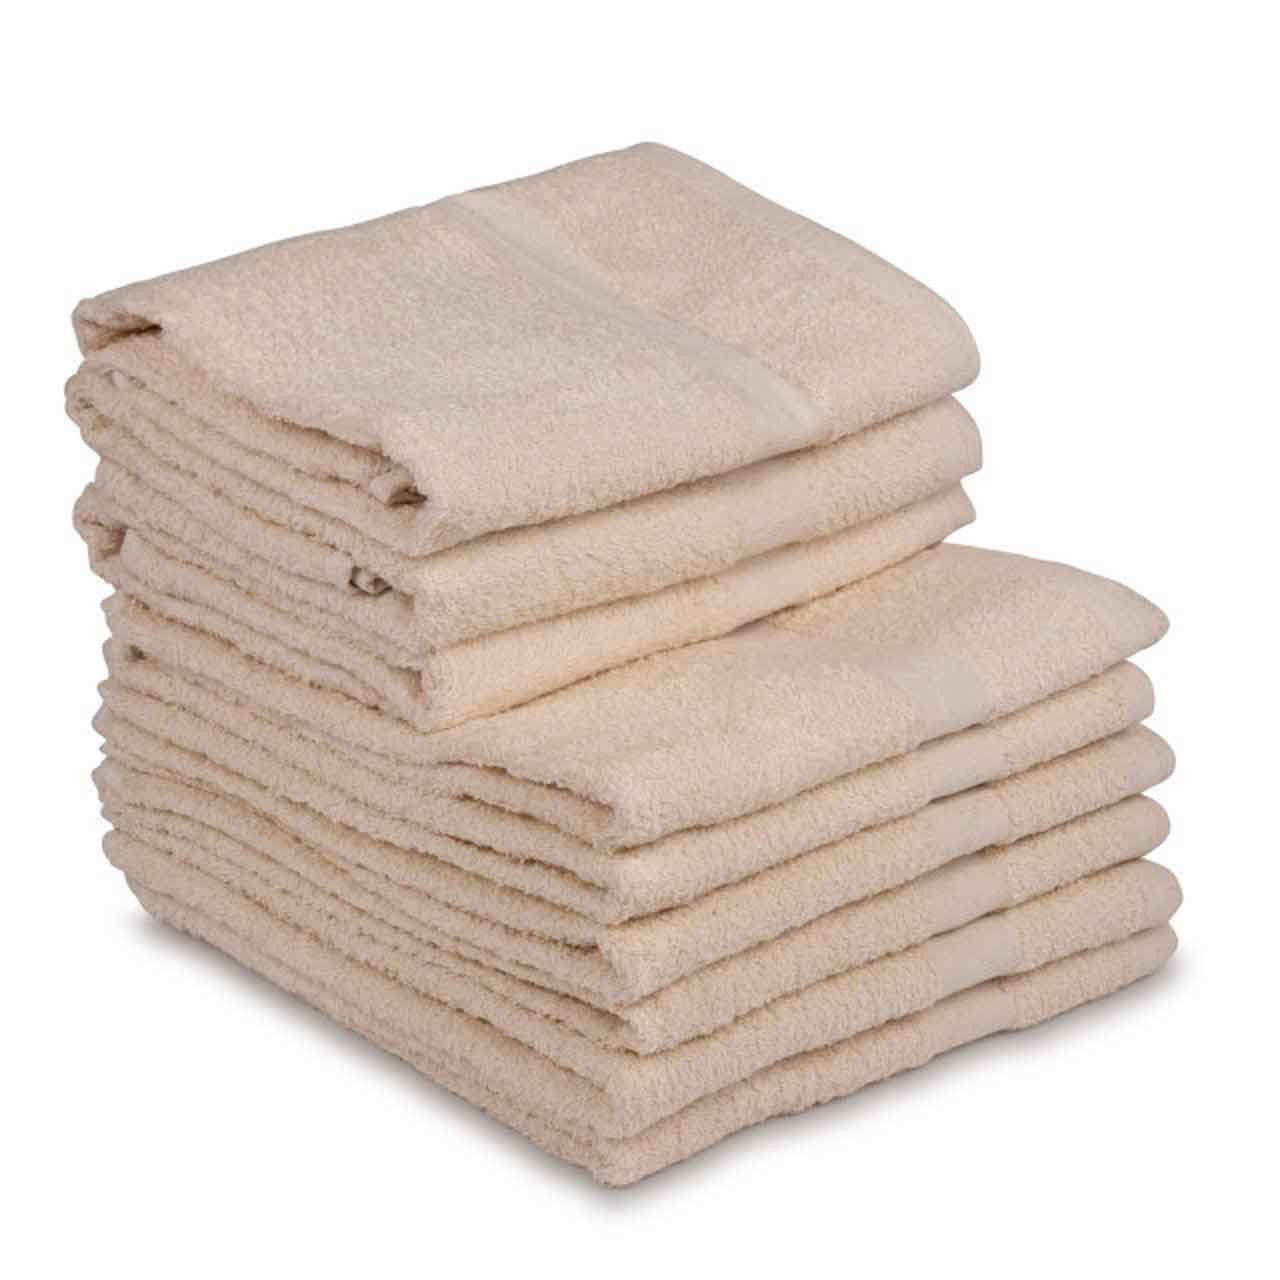 What is the best color of towels to have?